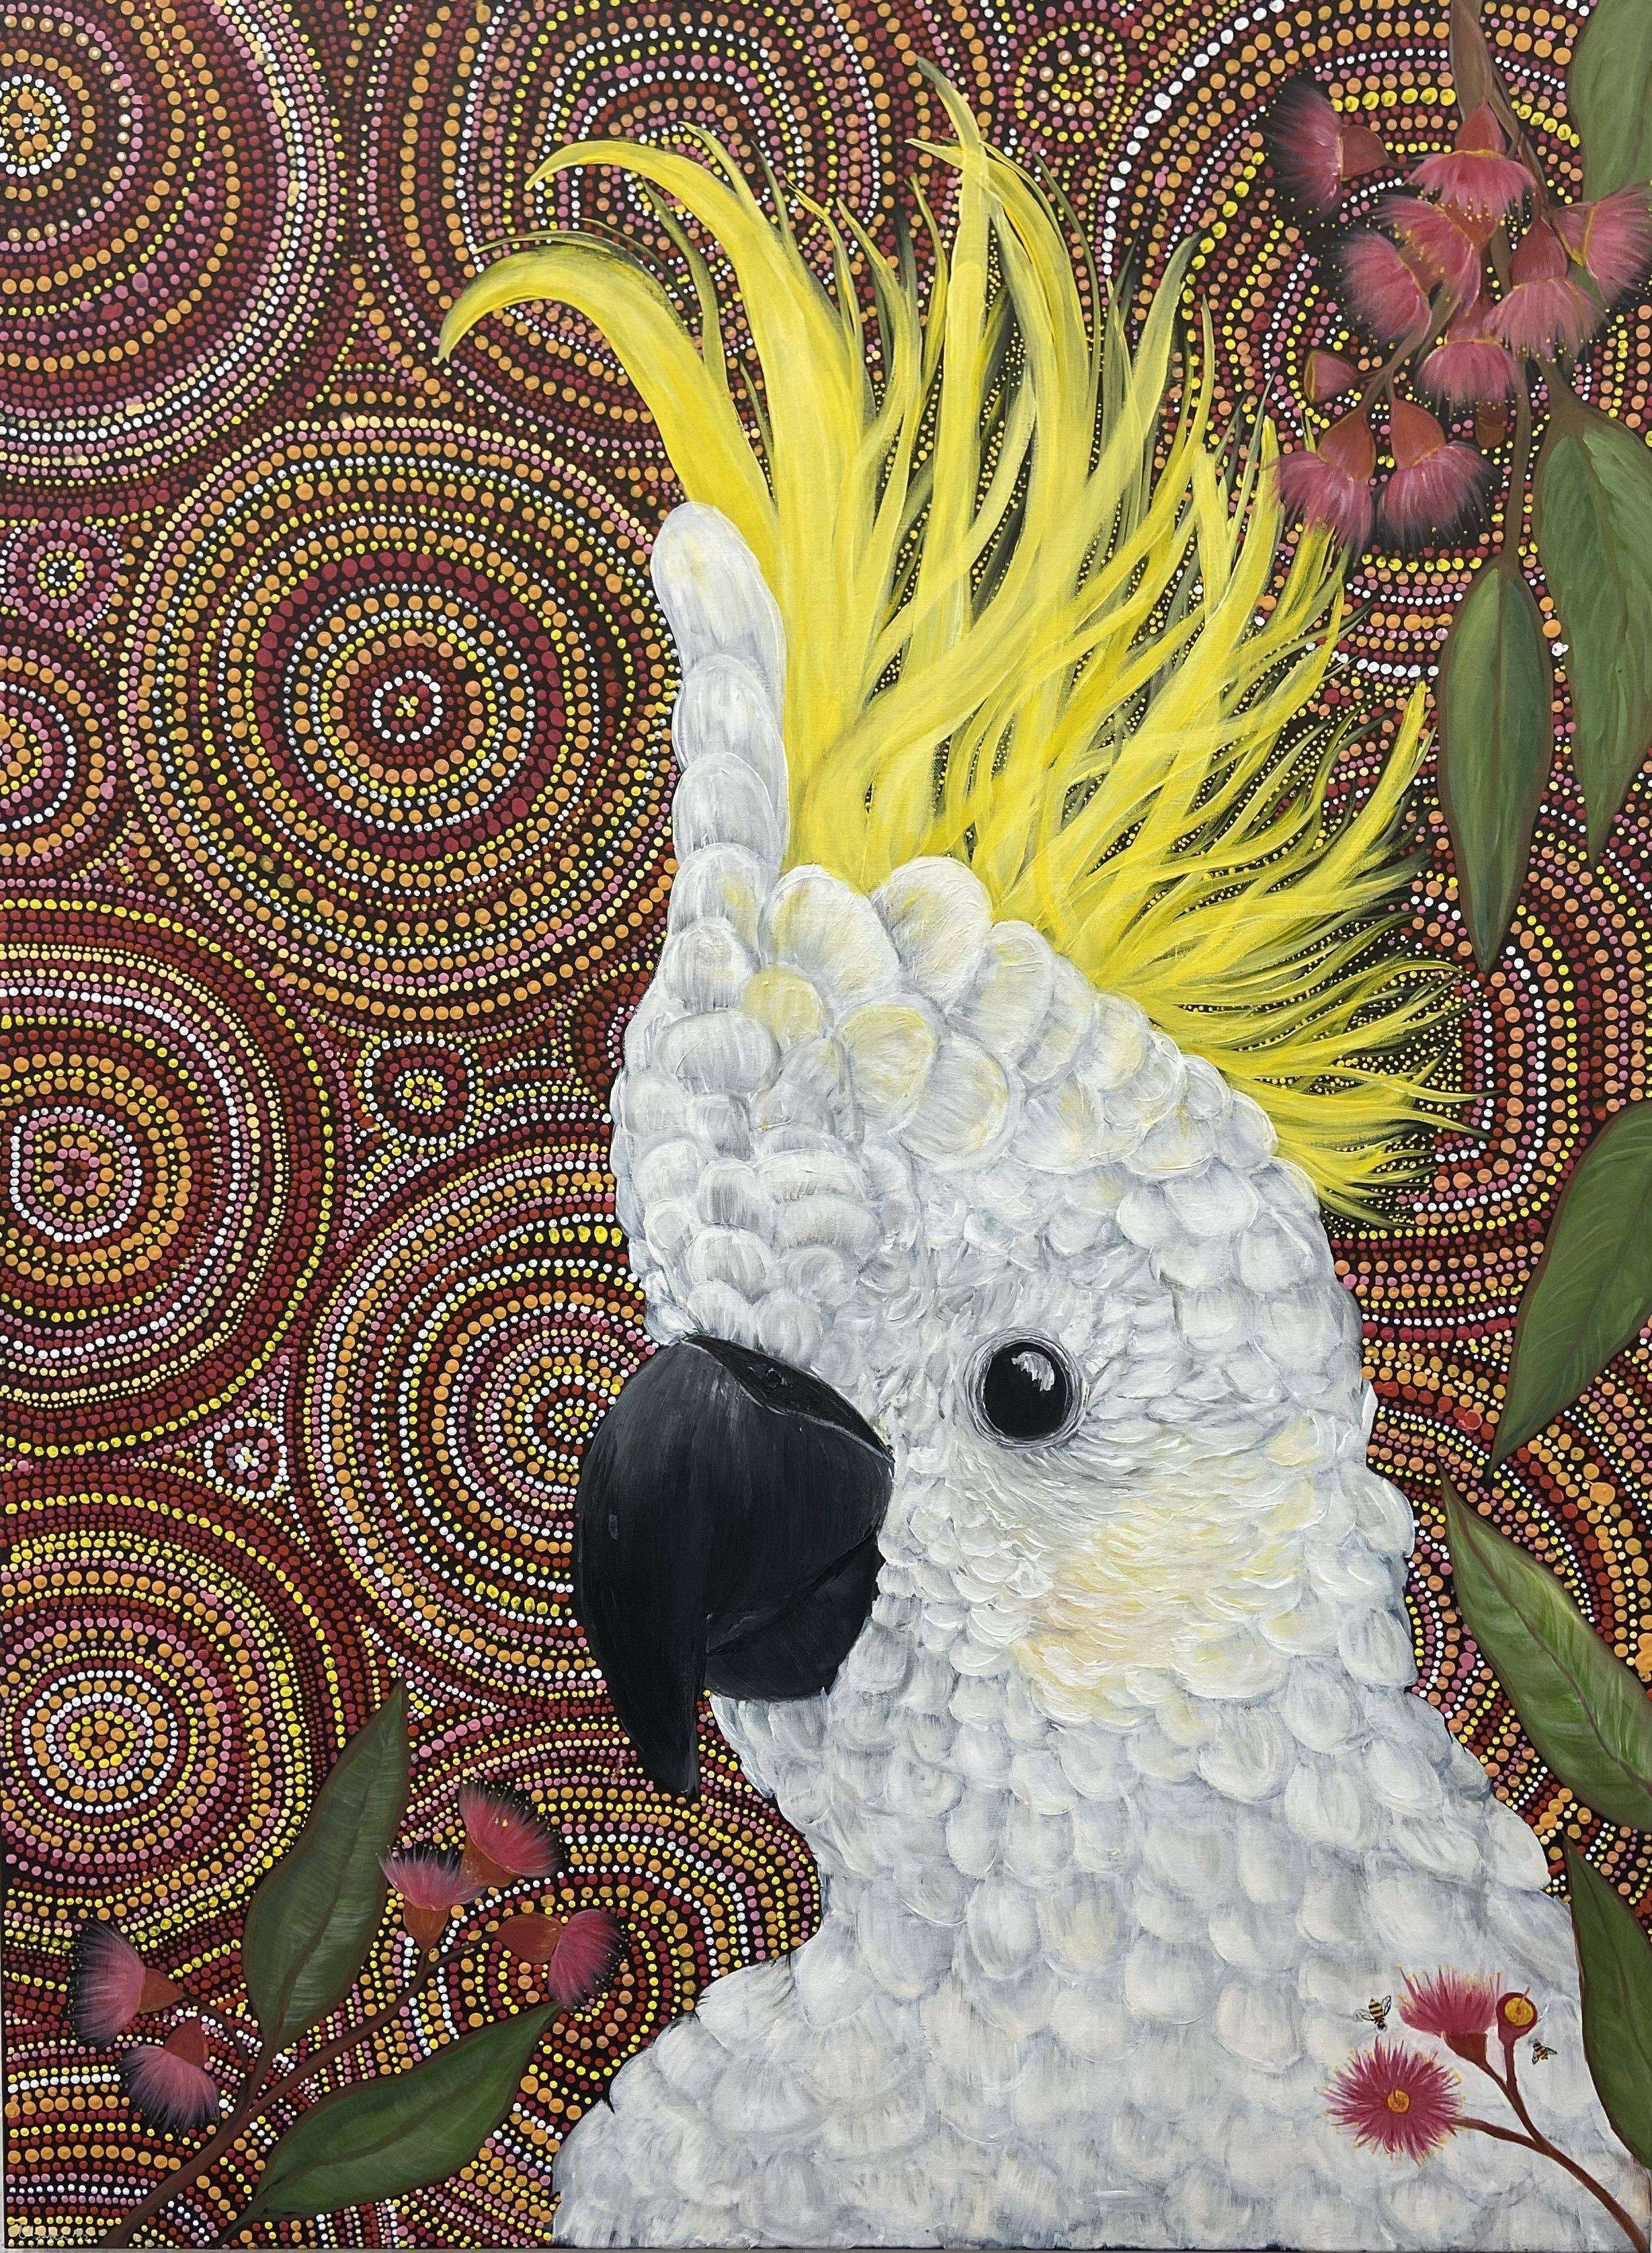 Painting by Wiradjuri artist Elizabeth Doherty's on display at the Curious Rabbit in Wagga Wagga